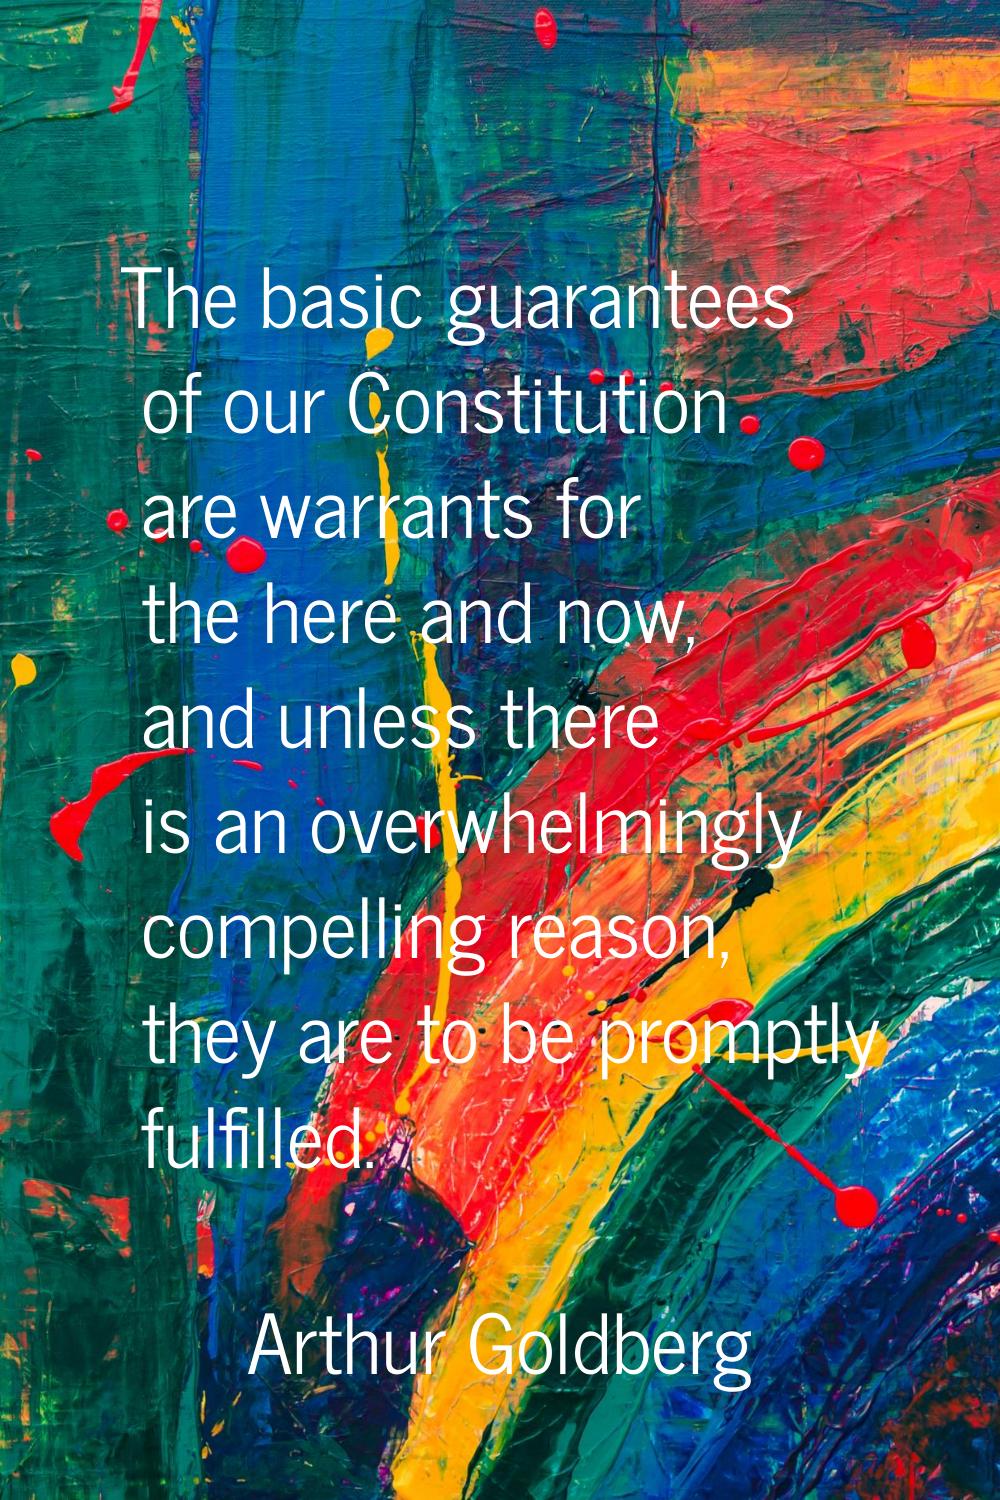 The basic guarantees of our Constitution are warrants for the here and now, and unless there is an 